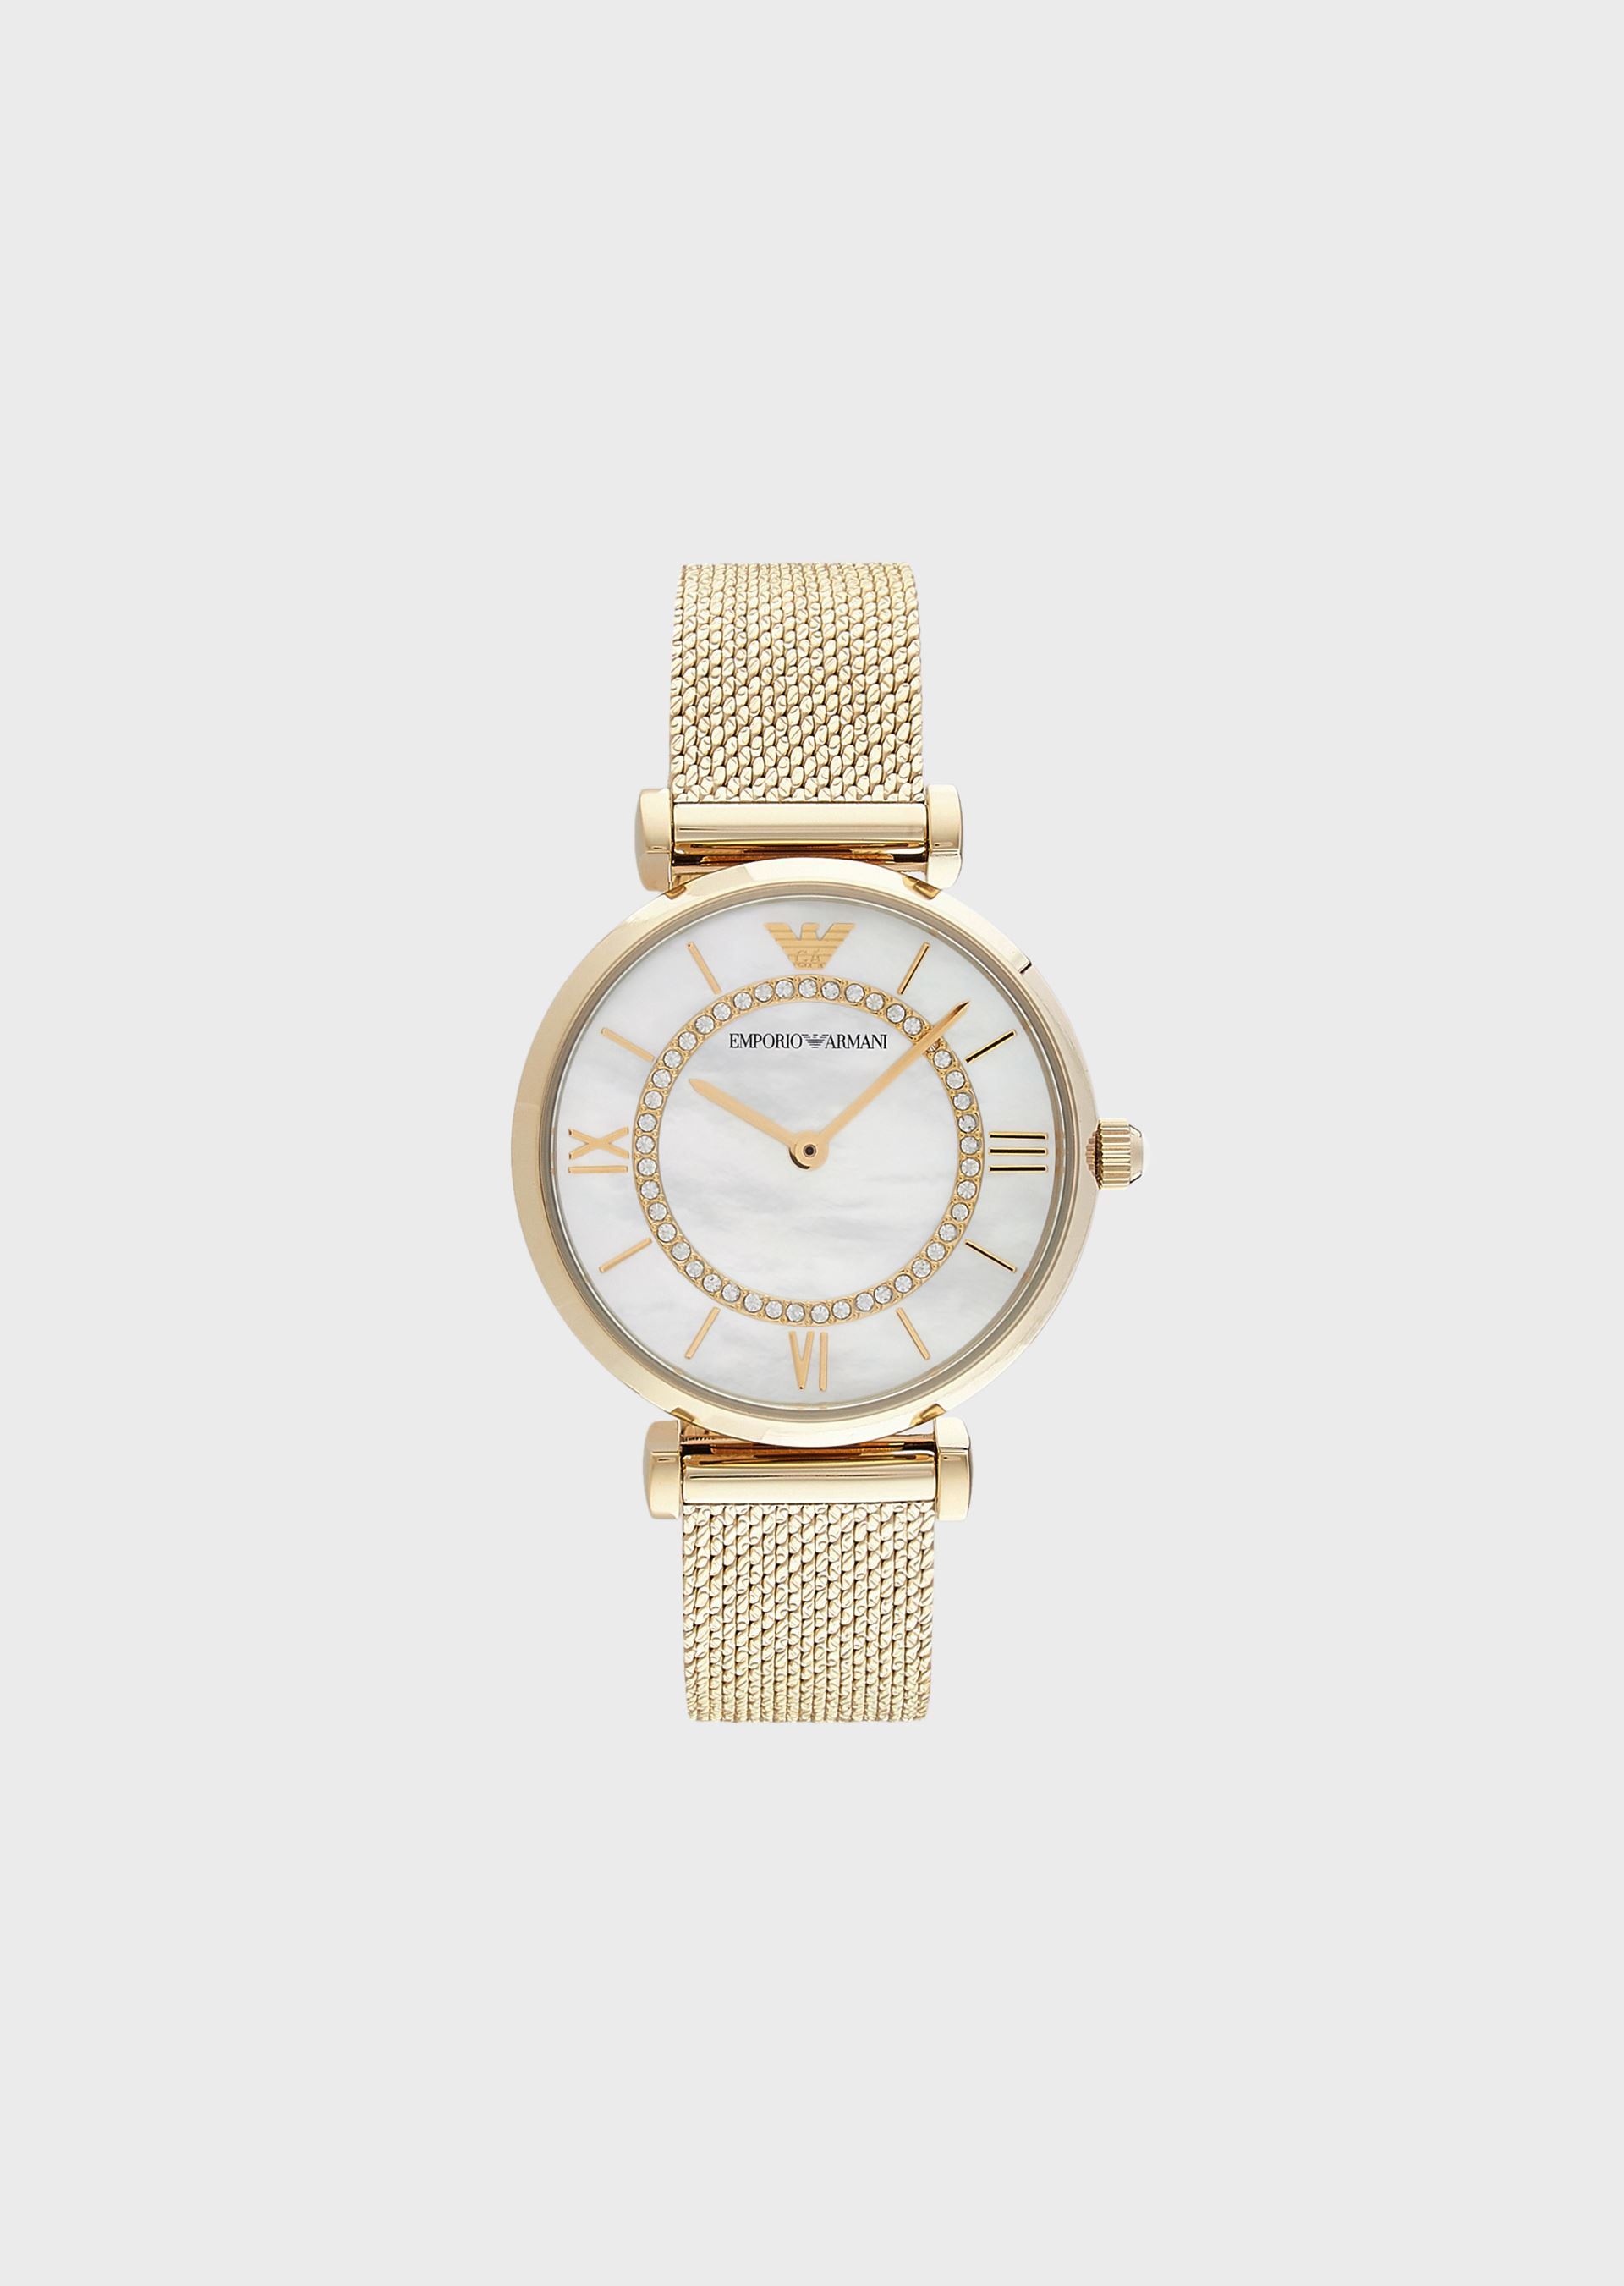 Emporio Armani Steel Strap Watches - Item 50246828 In Gold